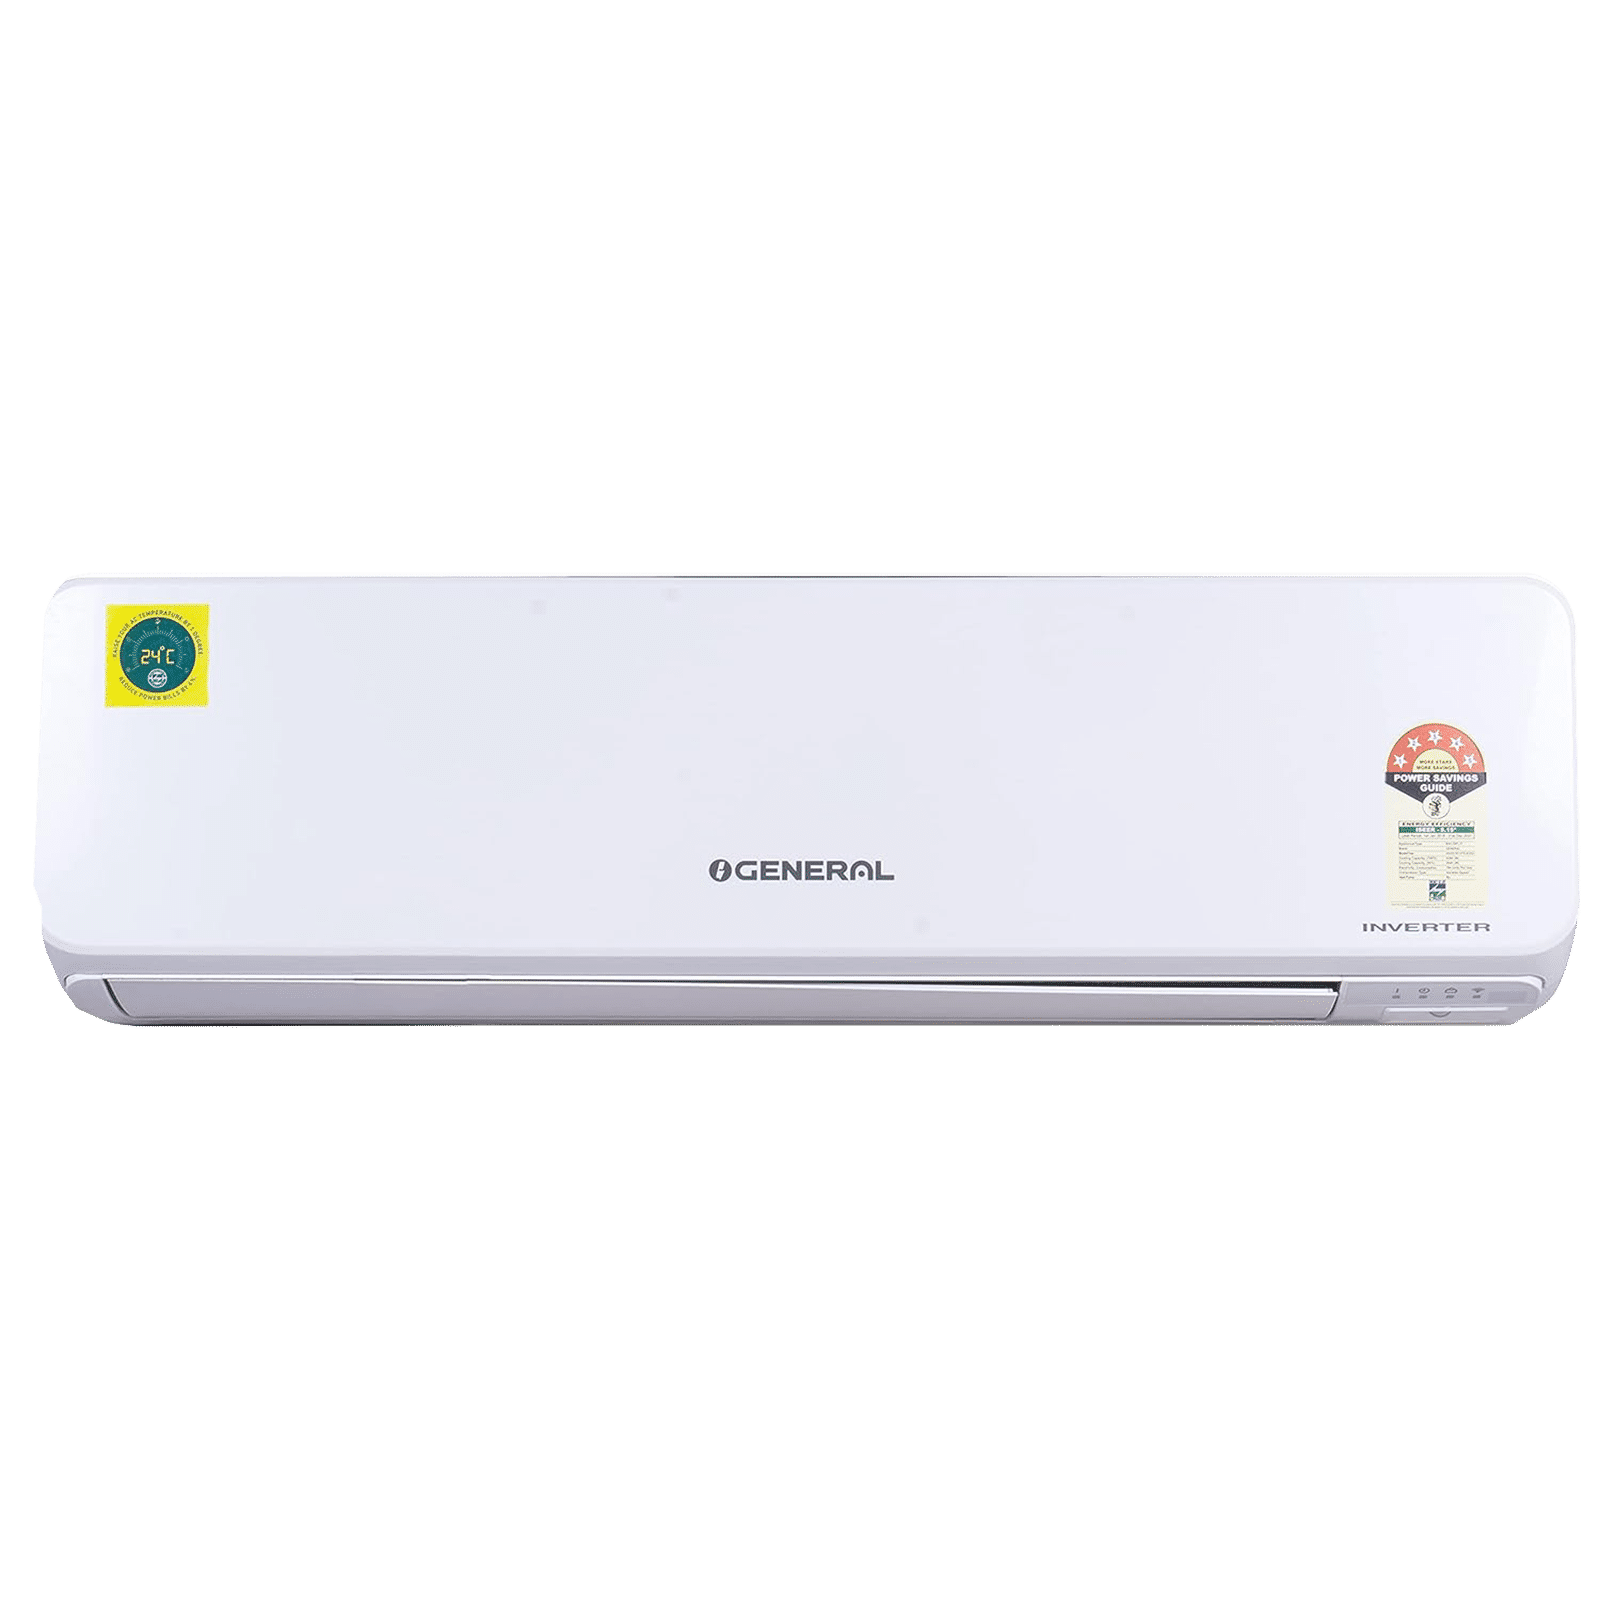 Buy O GENERAL 1.5 ton Split ASGA18BMWA-B 3 Star White Room Air Conditioner  online at best rates in India | L&T-SuFin